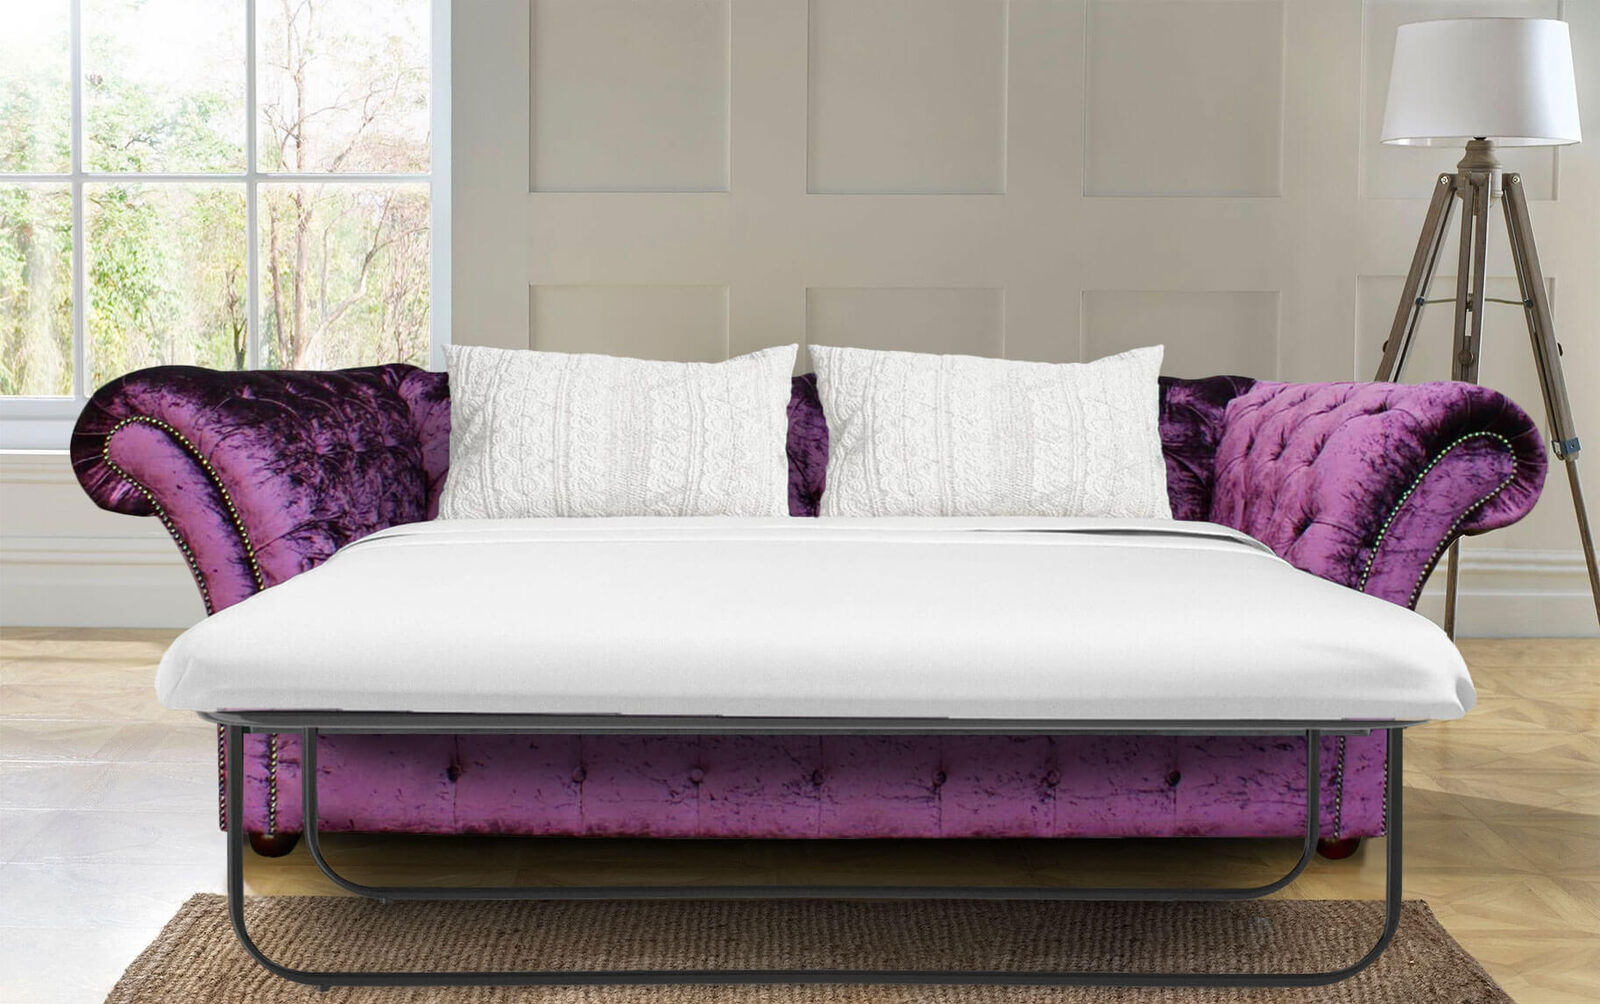 Product photograph of Chesterfield Calvert Purple 3 Seater Sofabed Settee Boutique Crush Velvet Fabric from Designer Sofas 4U